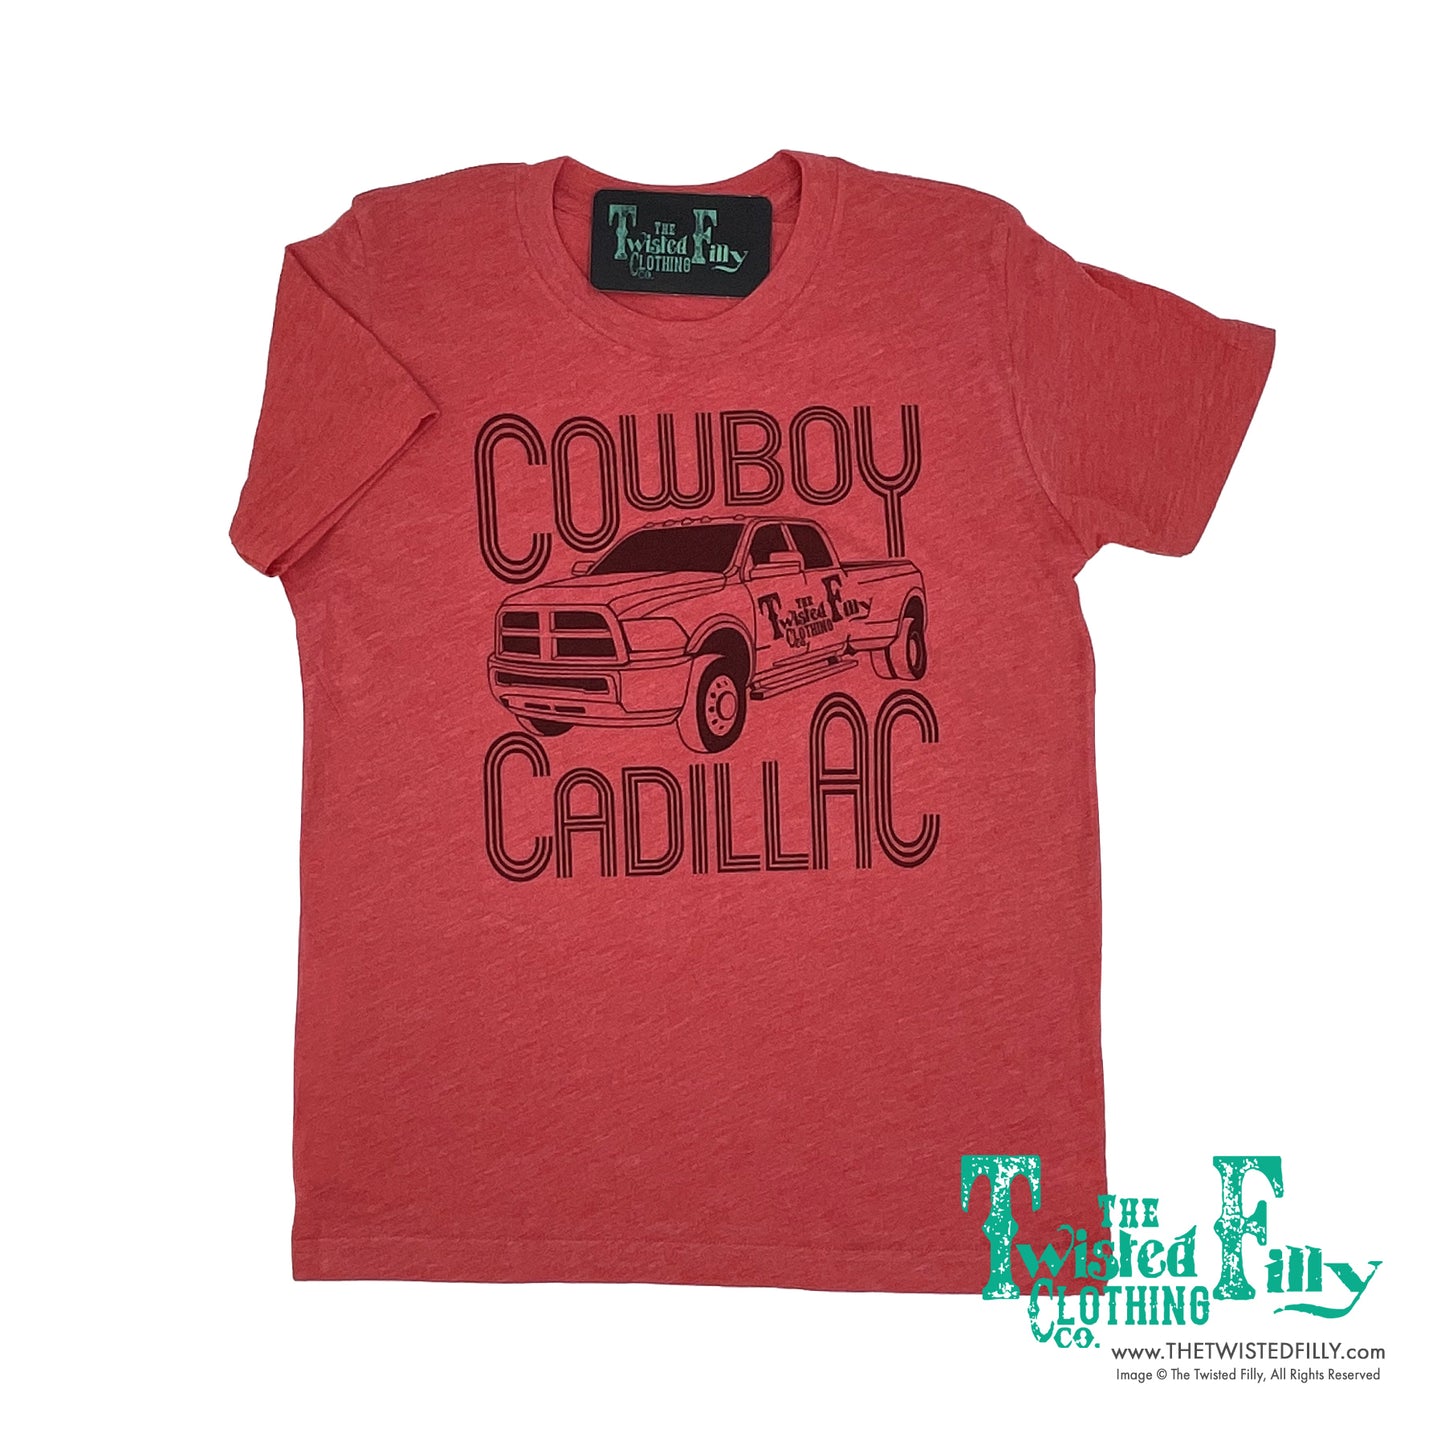 Cowboy Cadillac - S/S Adult Mens Tee - Red